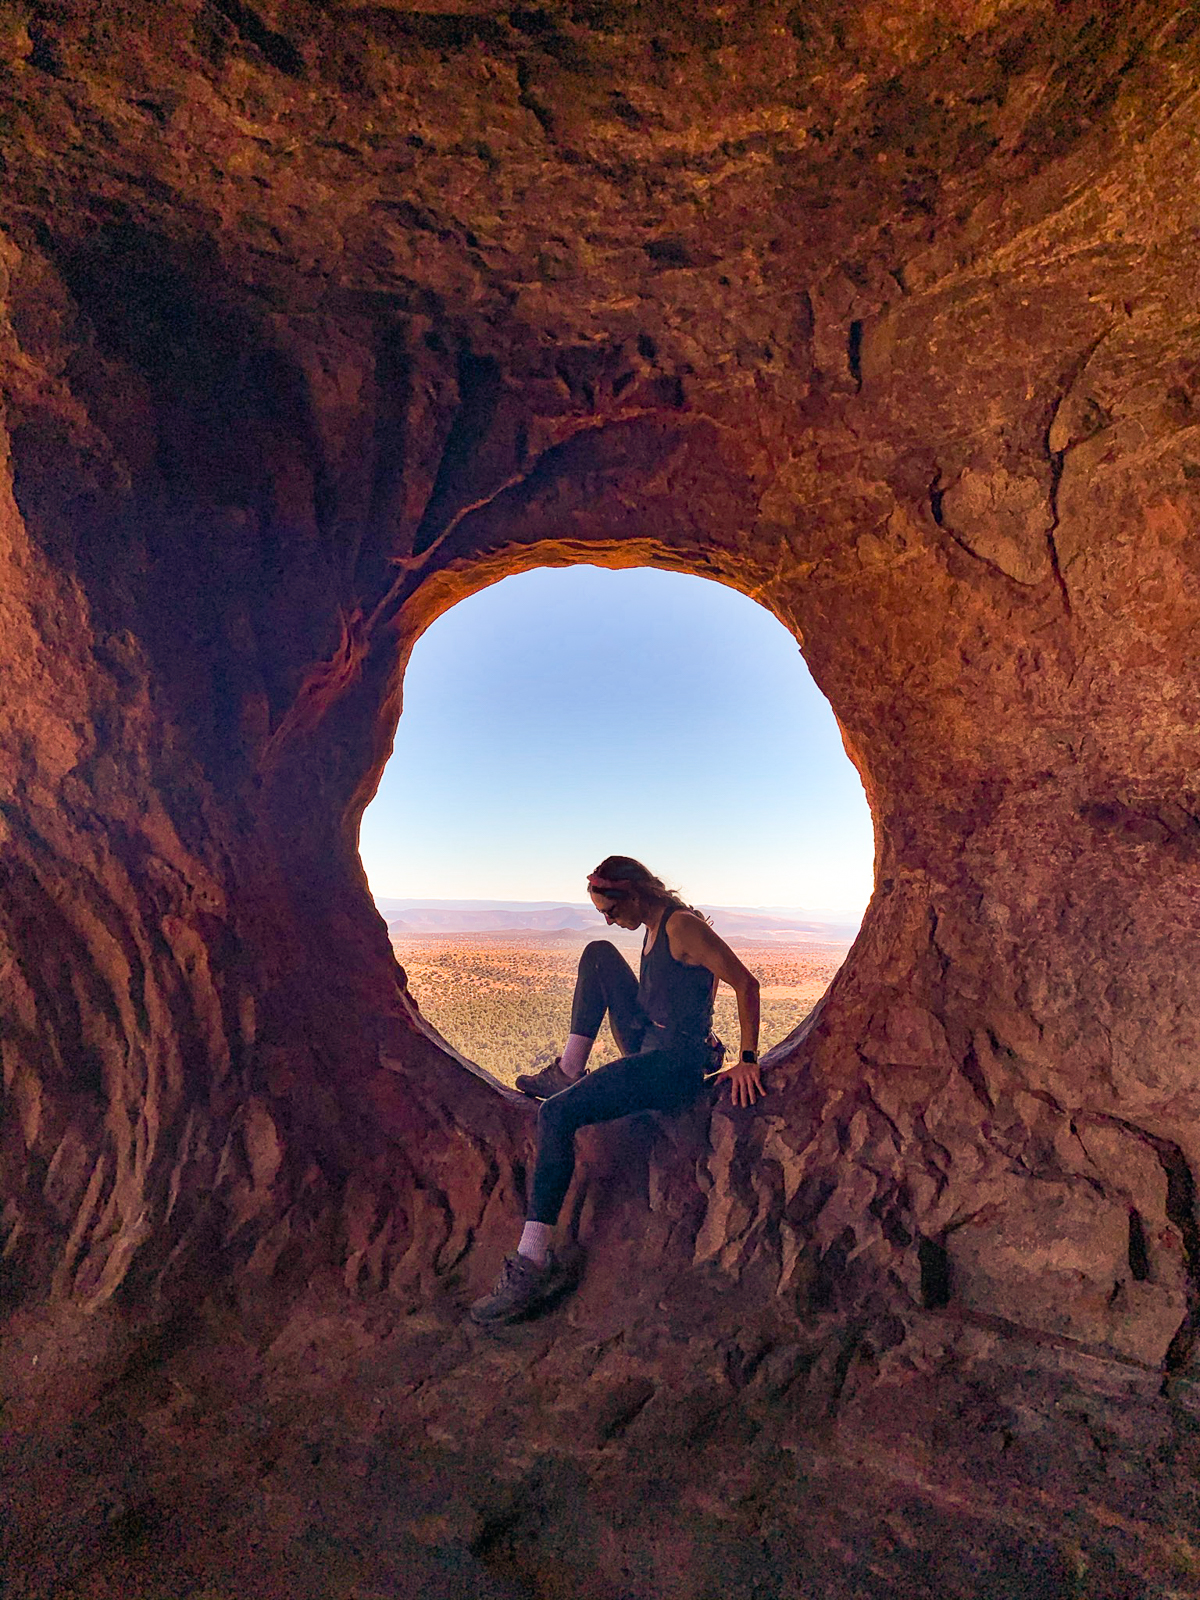 6 Iconic & Secret Sedona Vortex Hikes For All Levels shamans cave robbers roost